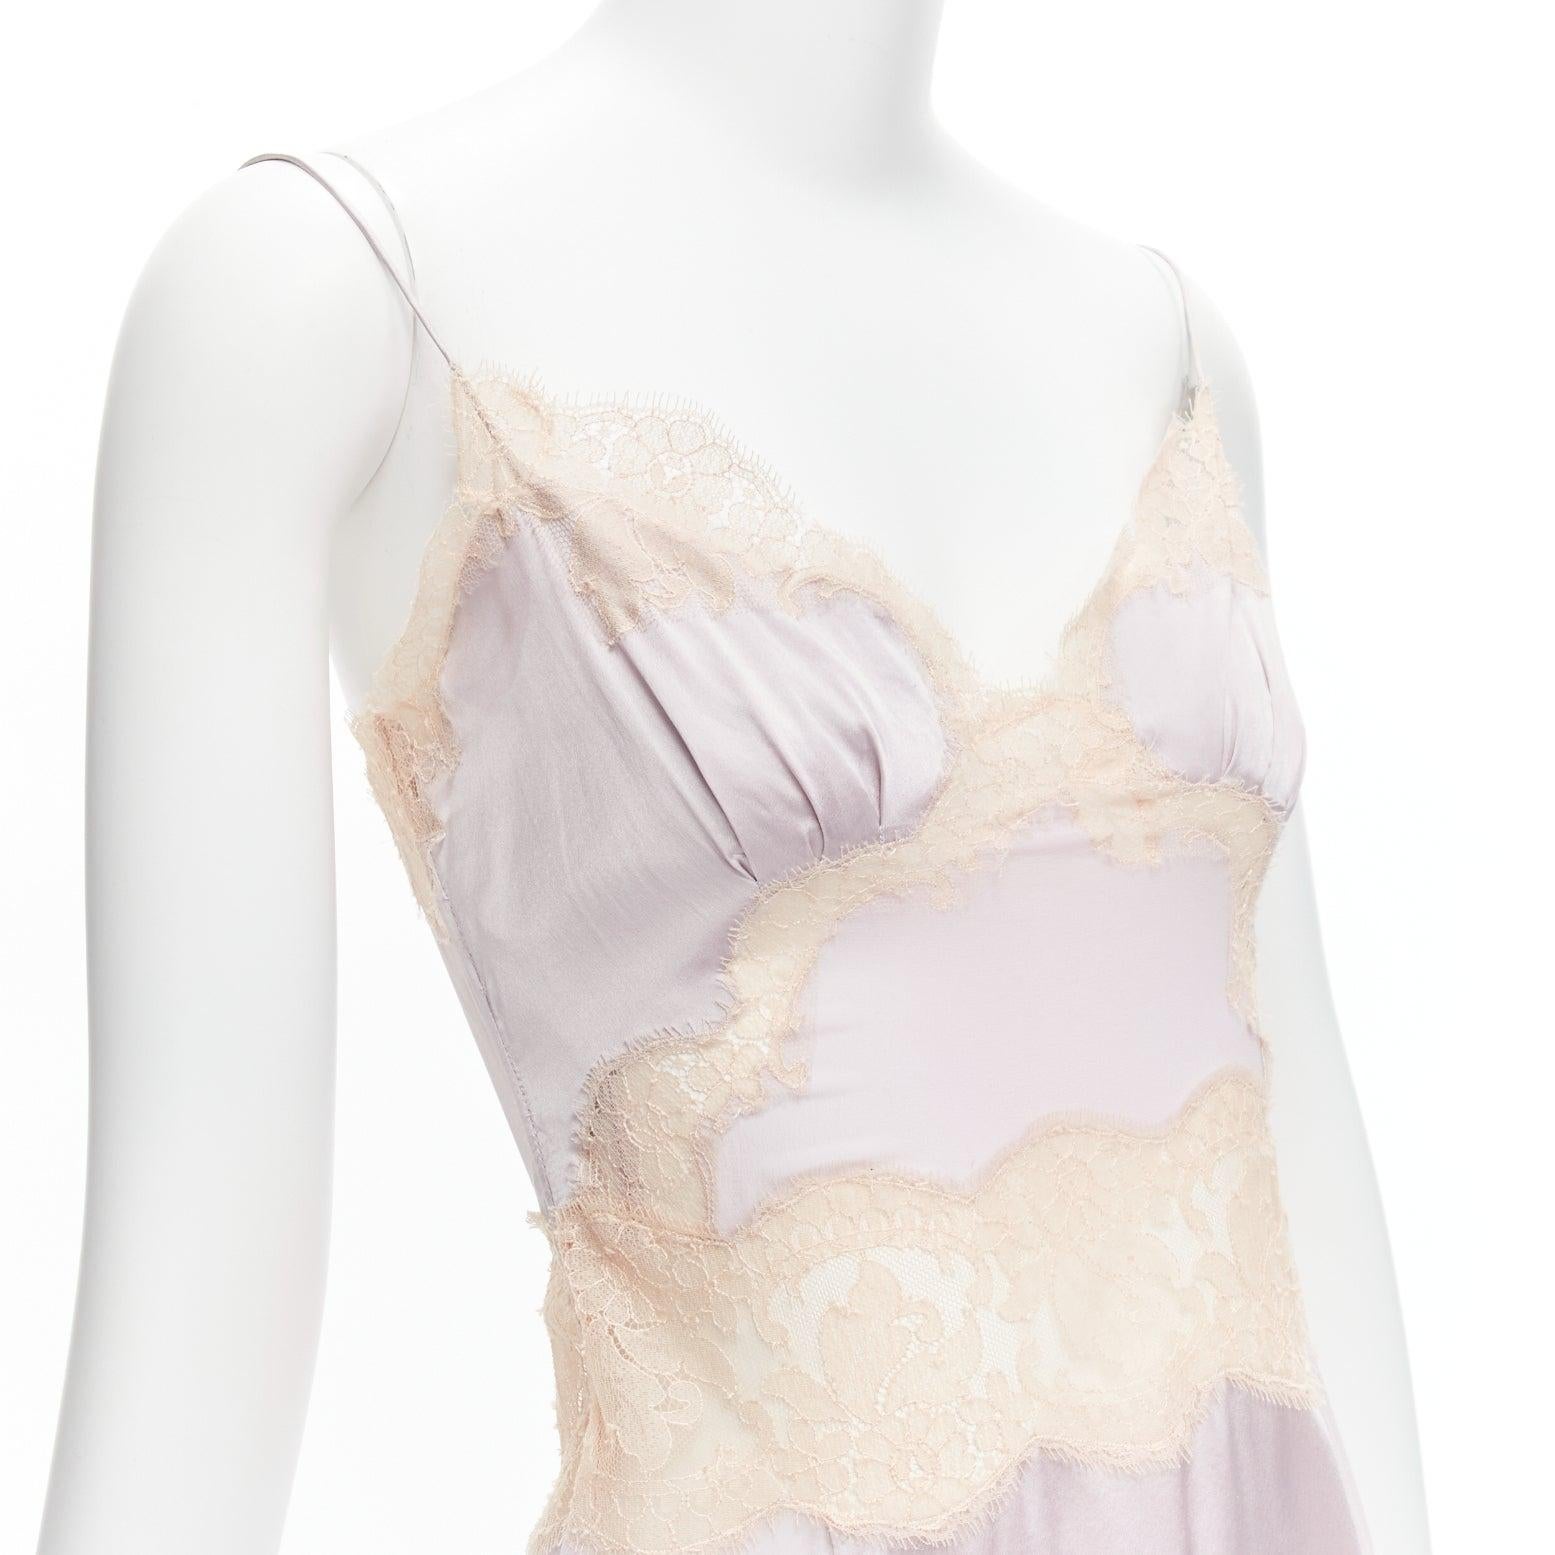 DOLCE GABBANA lilac purple silk sheer nude lace trim cami slip dress IT40 S
Reference: TGAS/D00514
Brand: Dolce Gabbana
Designer: Domenico Dolce and Stefano Gabbana
Material: Silk, Blend
Color: Purple, Nude
Pattern: Lace
Closure: Zip
Extra Details: